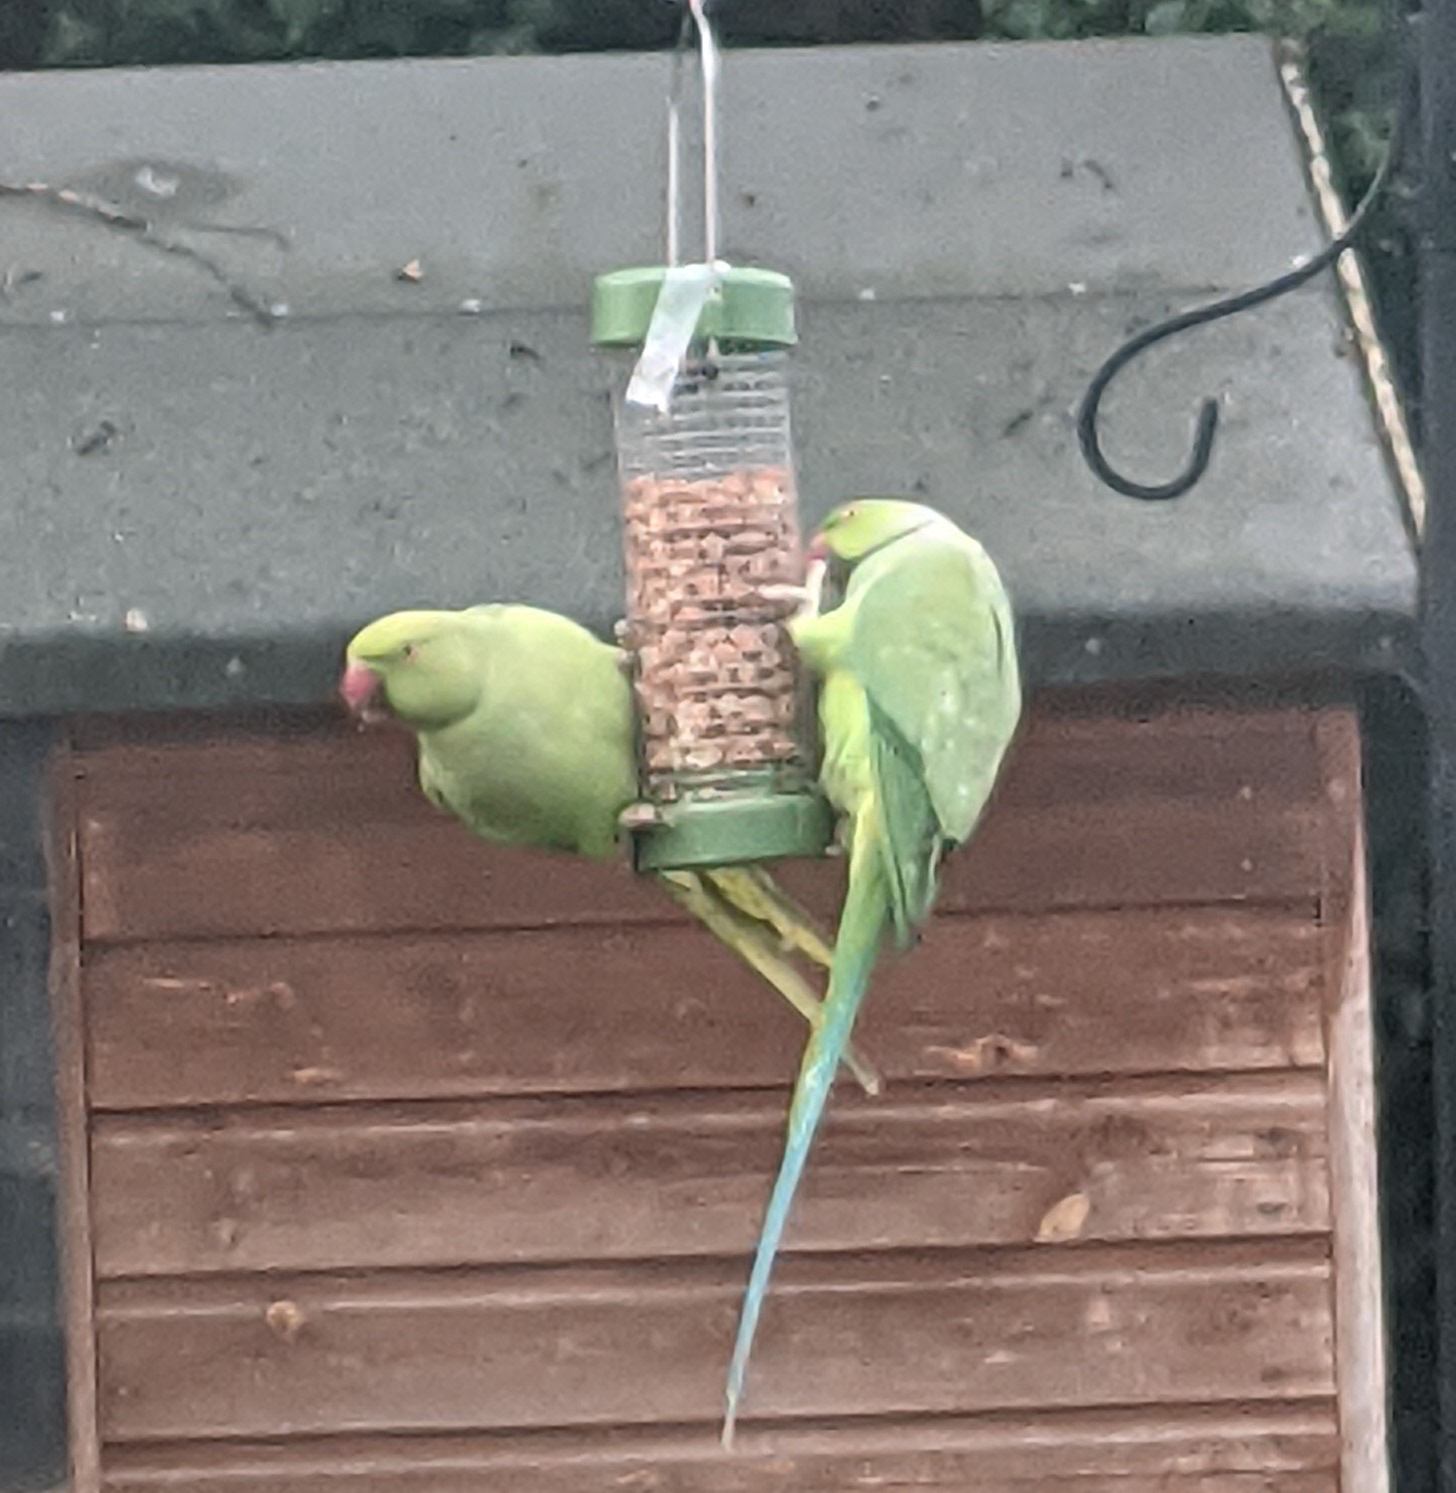 Two bright green ring-necked parakeets on a peanut feeder - one is tucking in, and the other is leaning out from the feeder, on the lookout